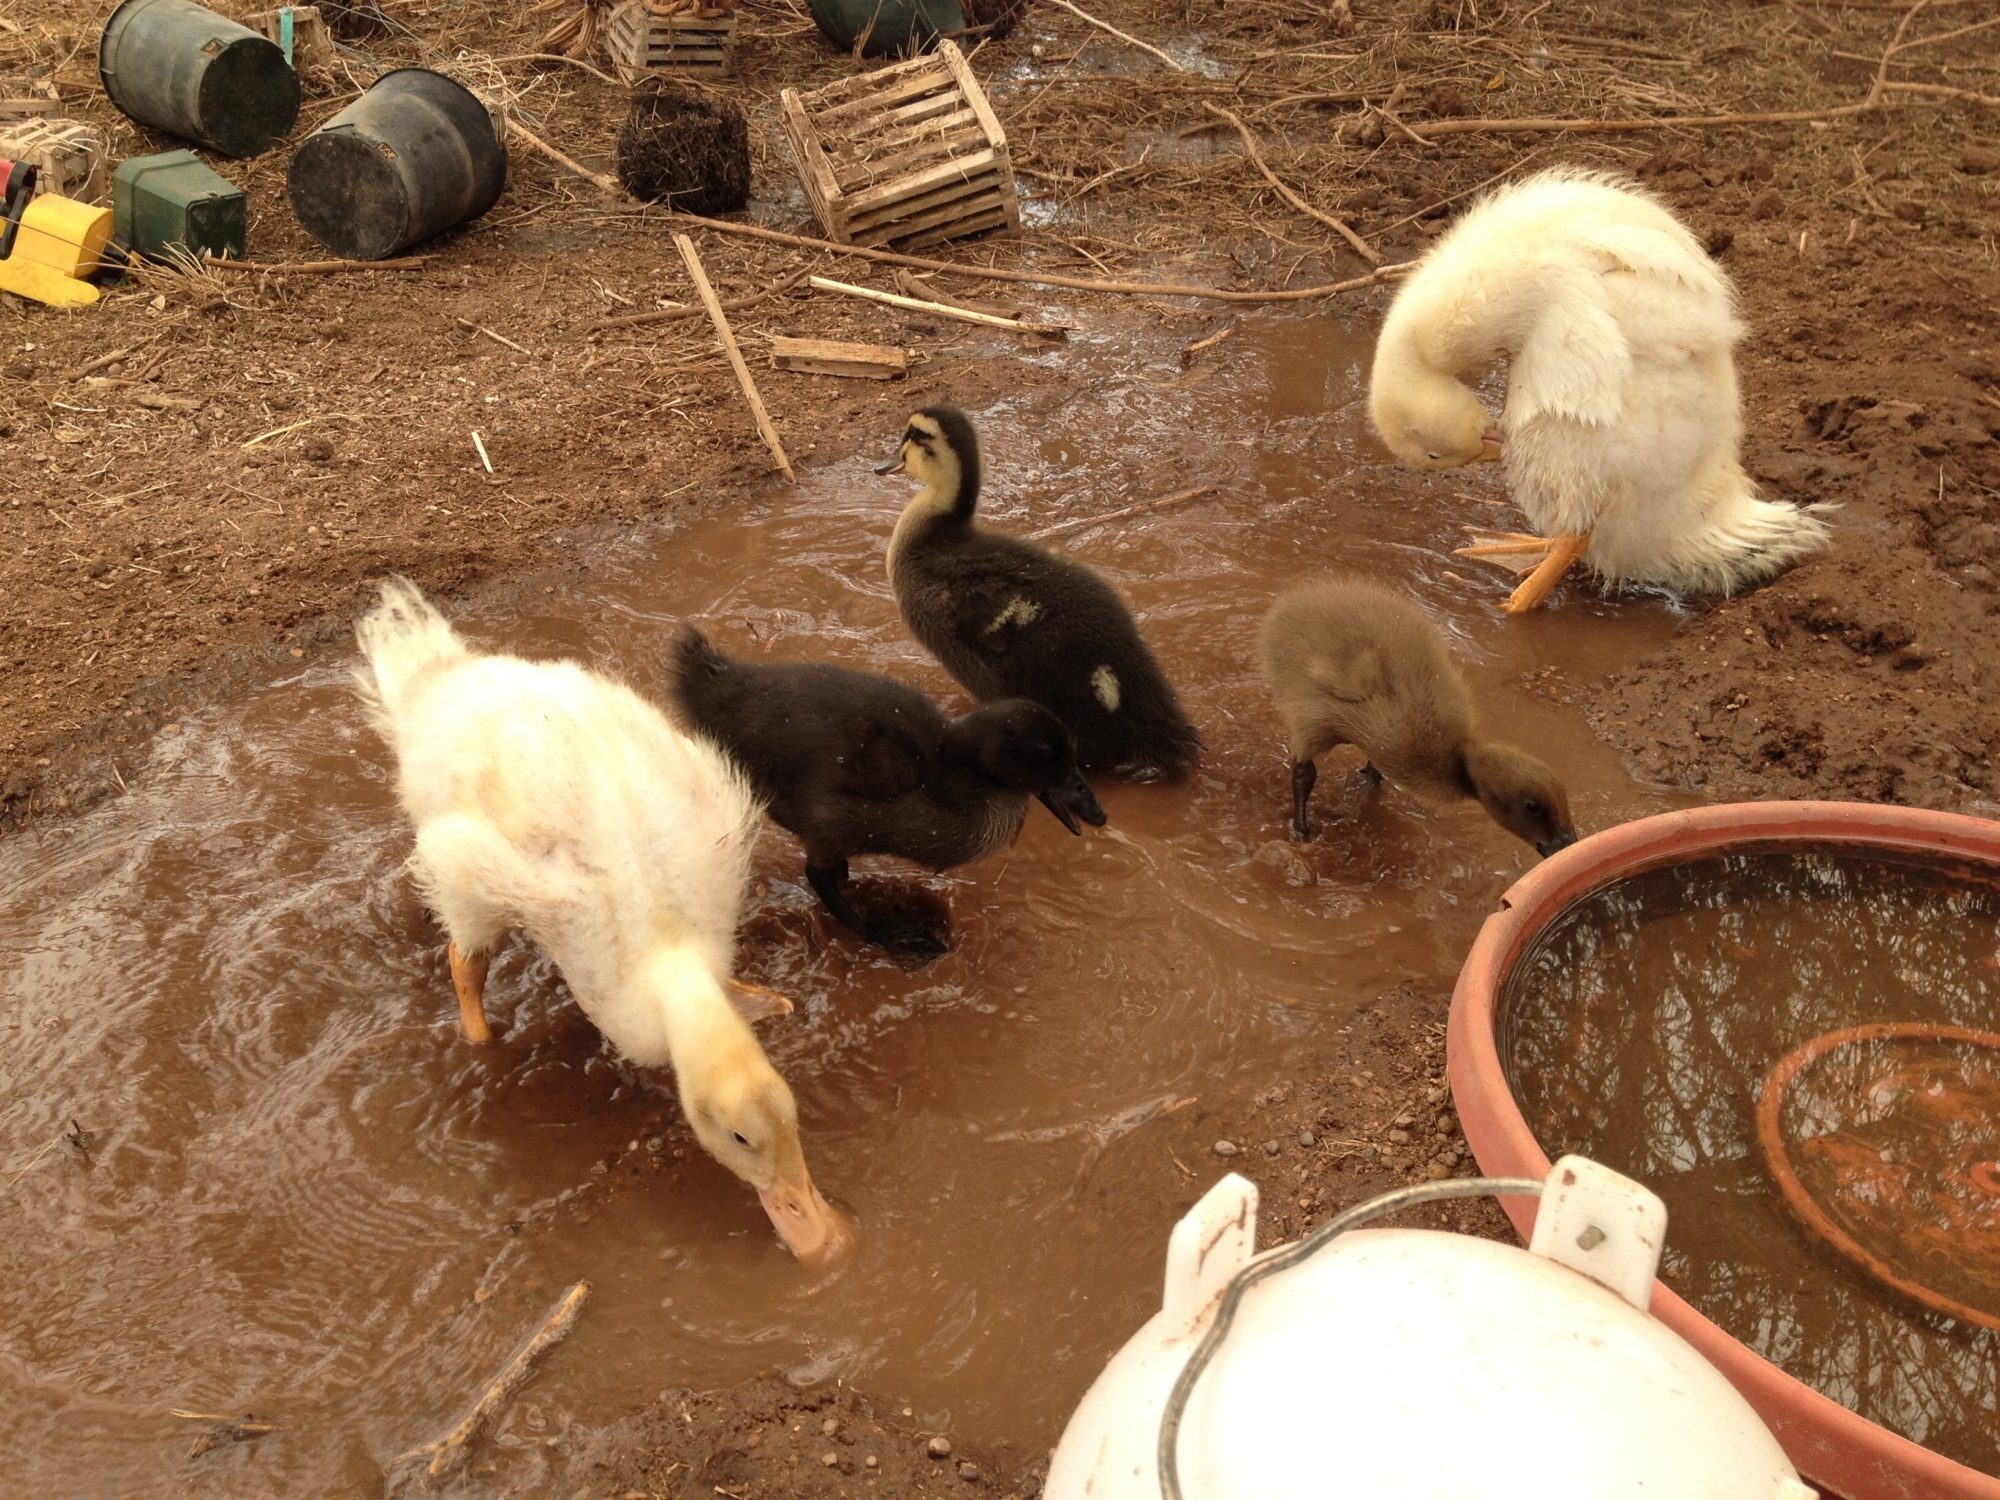 4/08/2014 was cleaning out their water and they started splashing in it.